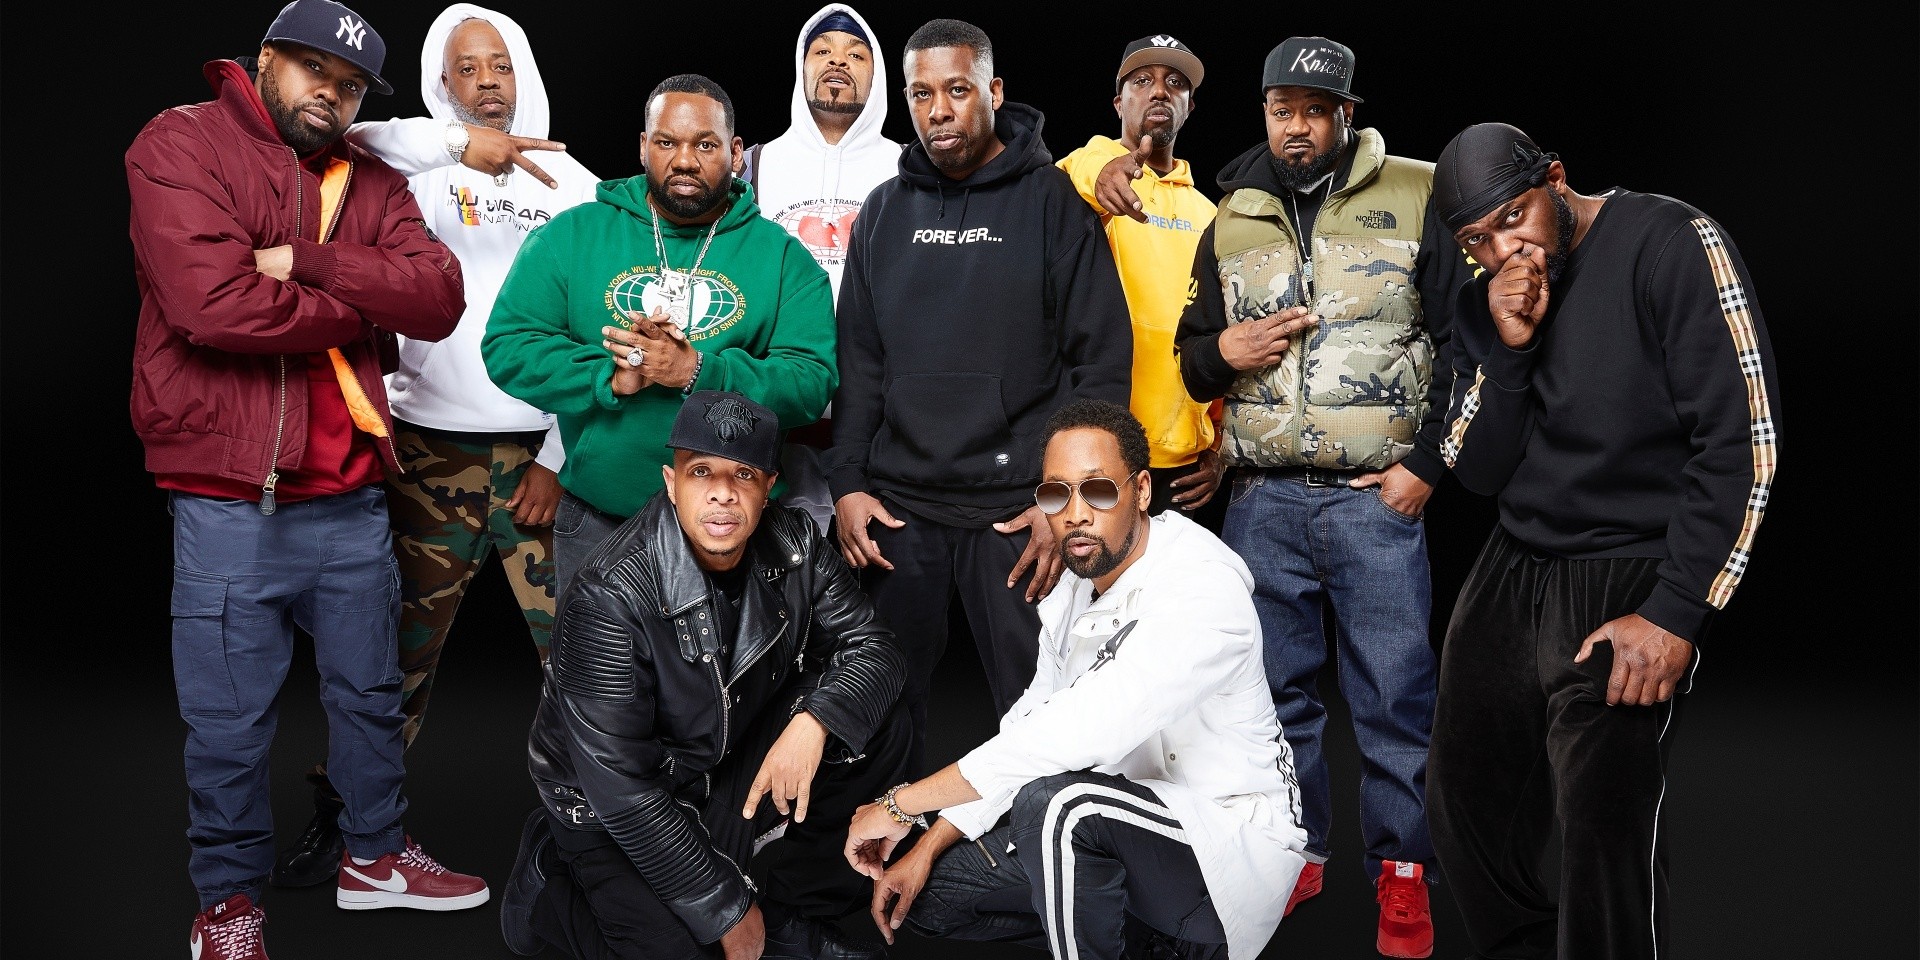 Wu-Tang Clan announces new EP inspired from documentary, Of Mics And Men